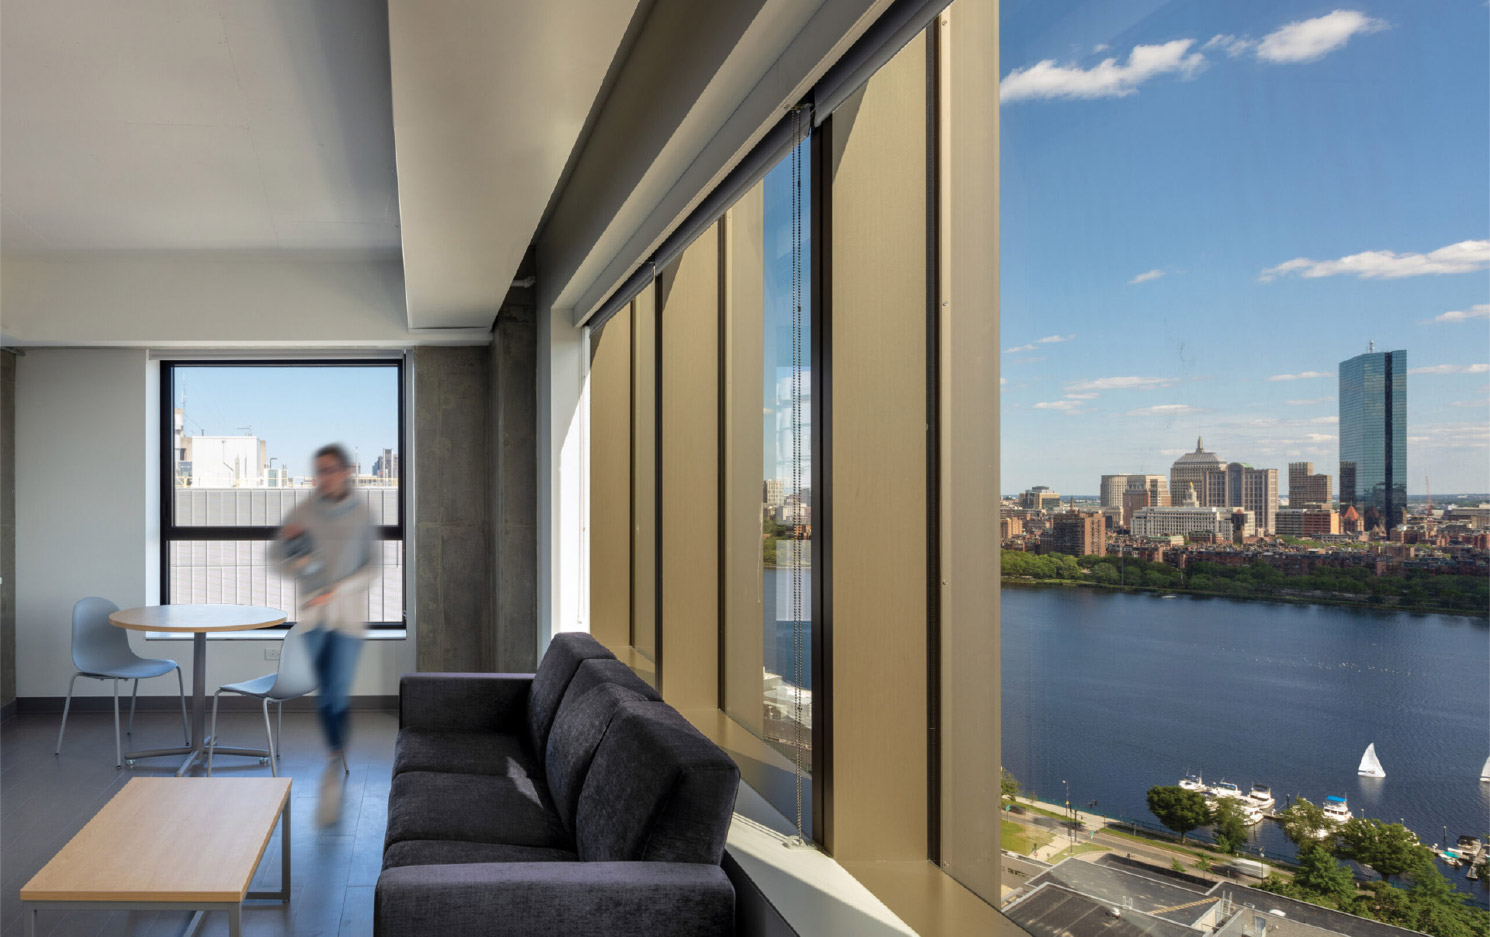 An MIT residence with windows overlooking the Charles River